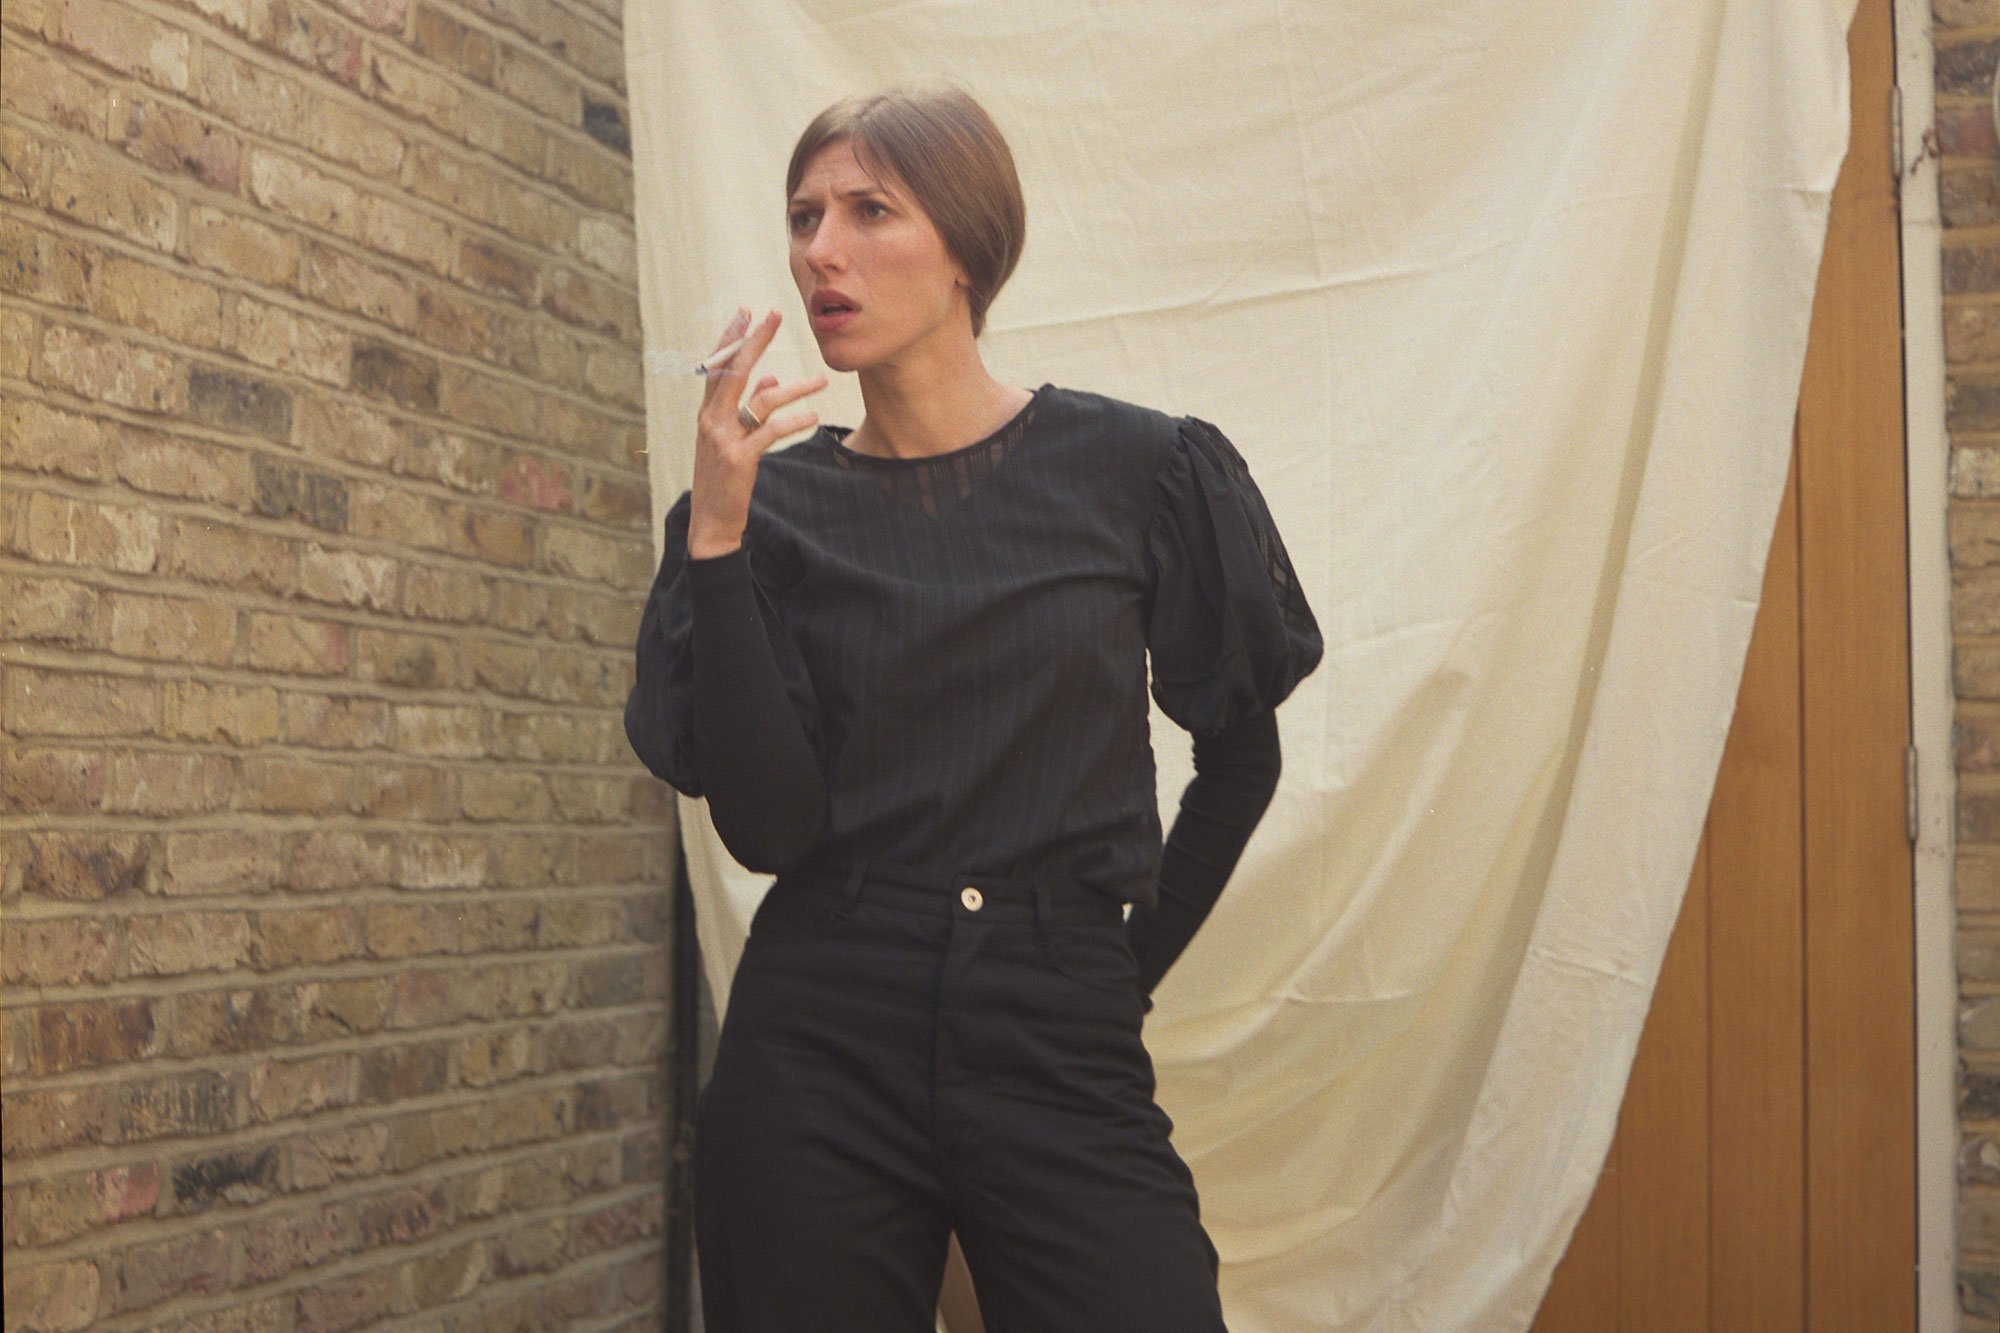 Aldous Harding wants you to know what matters